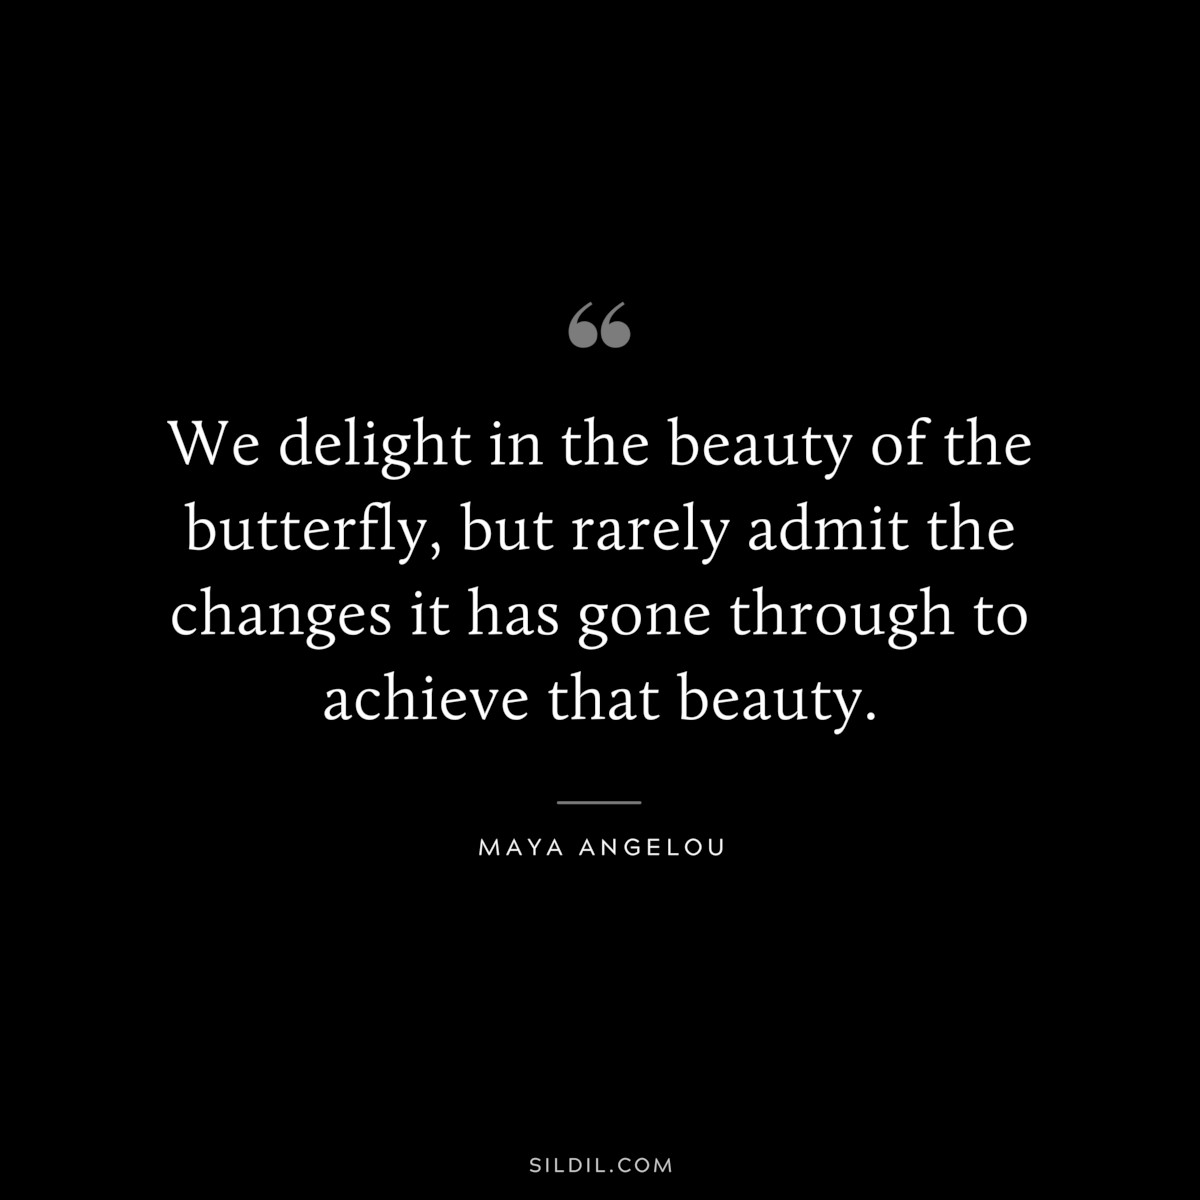 We delight in the beauty of the butterfly, but rarely admit the changes it has gone through to achieve that beauty. ― Maya Angelou